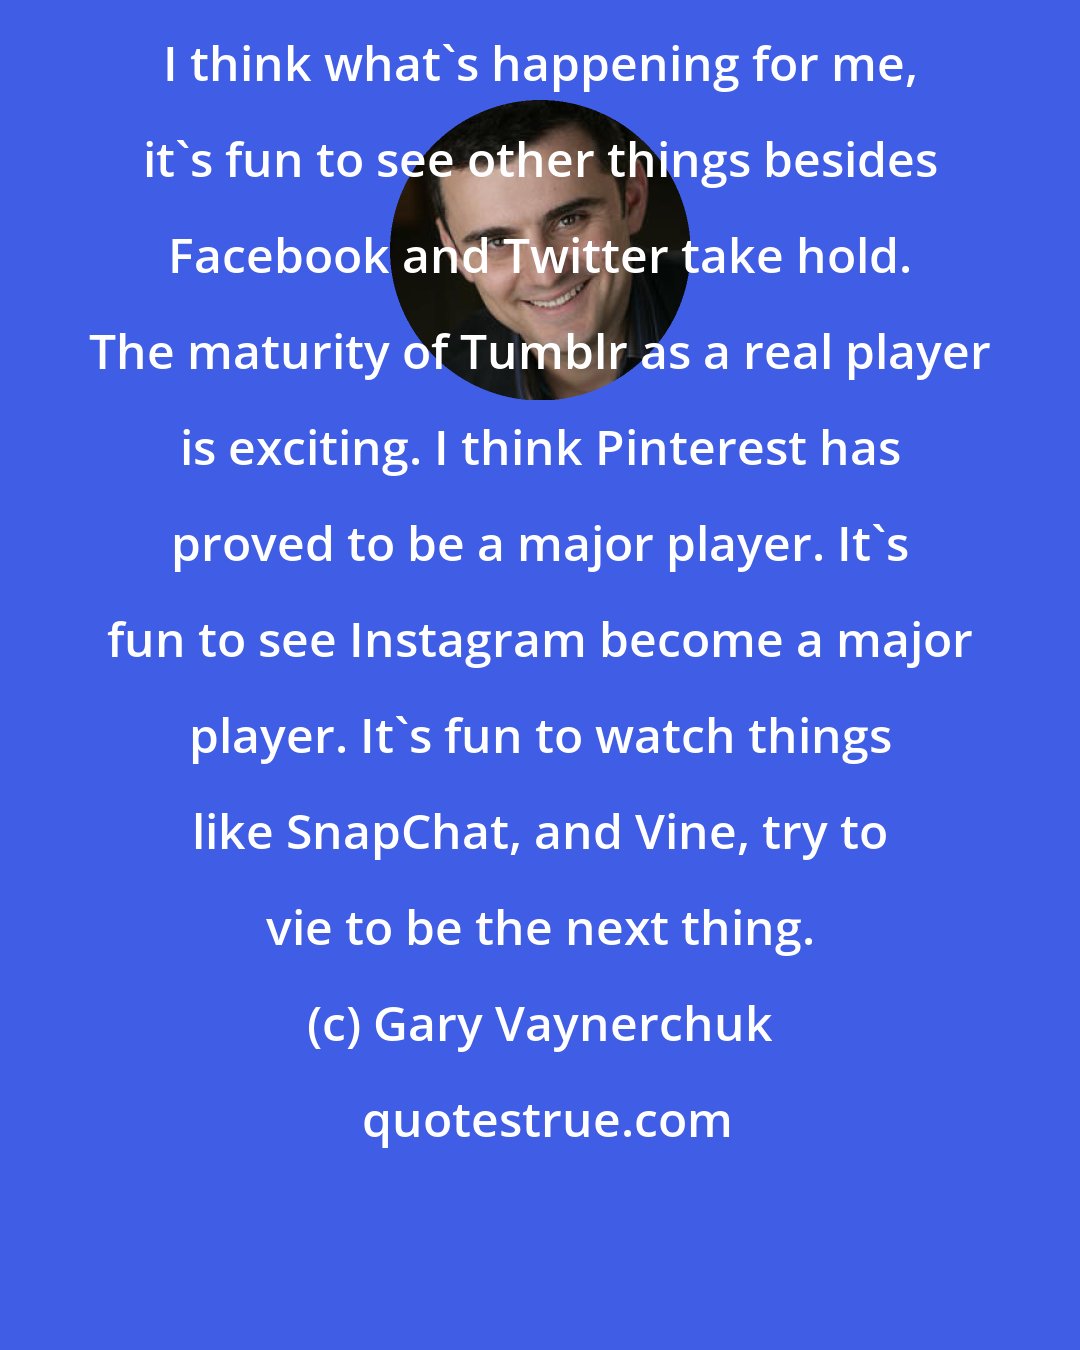 Gary Vaynerchuk: I think what's happening for me, it's fun to see other things besides Facebook and Twitter take hold. The maturity of Tumblr as a real player is exciting. I think Pinterest has proved to be a major player. It's fun to see Instagram become a major player. It's fun to watch things like SnapChat, and Vine, try to vie to be the next thing.